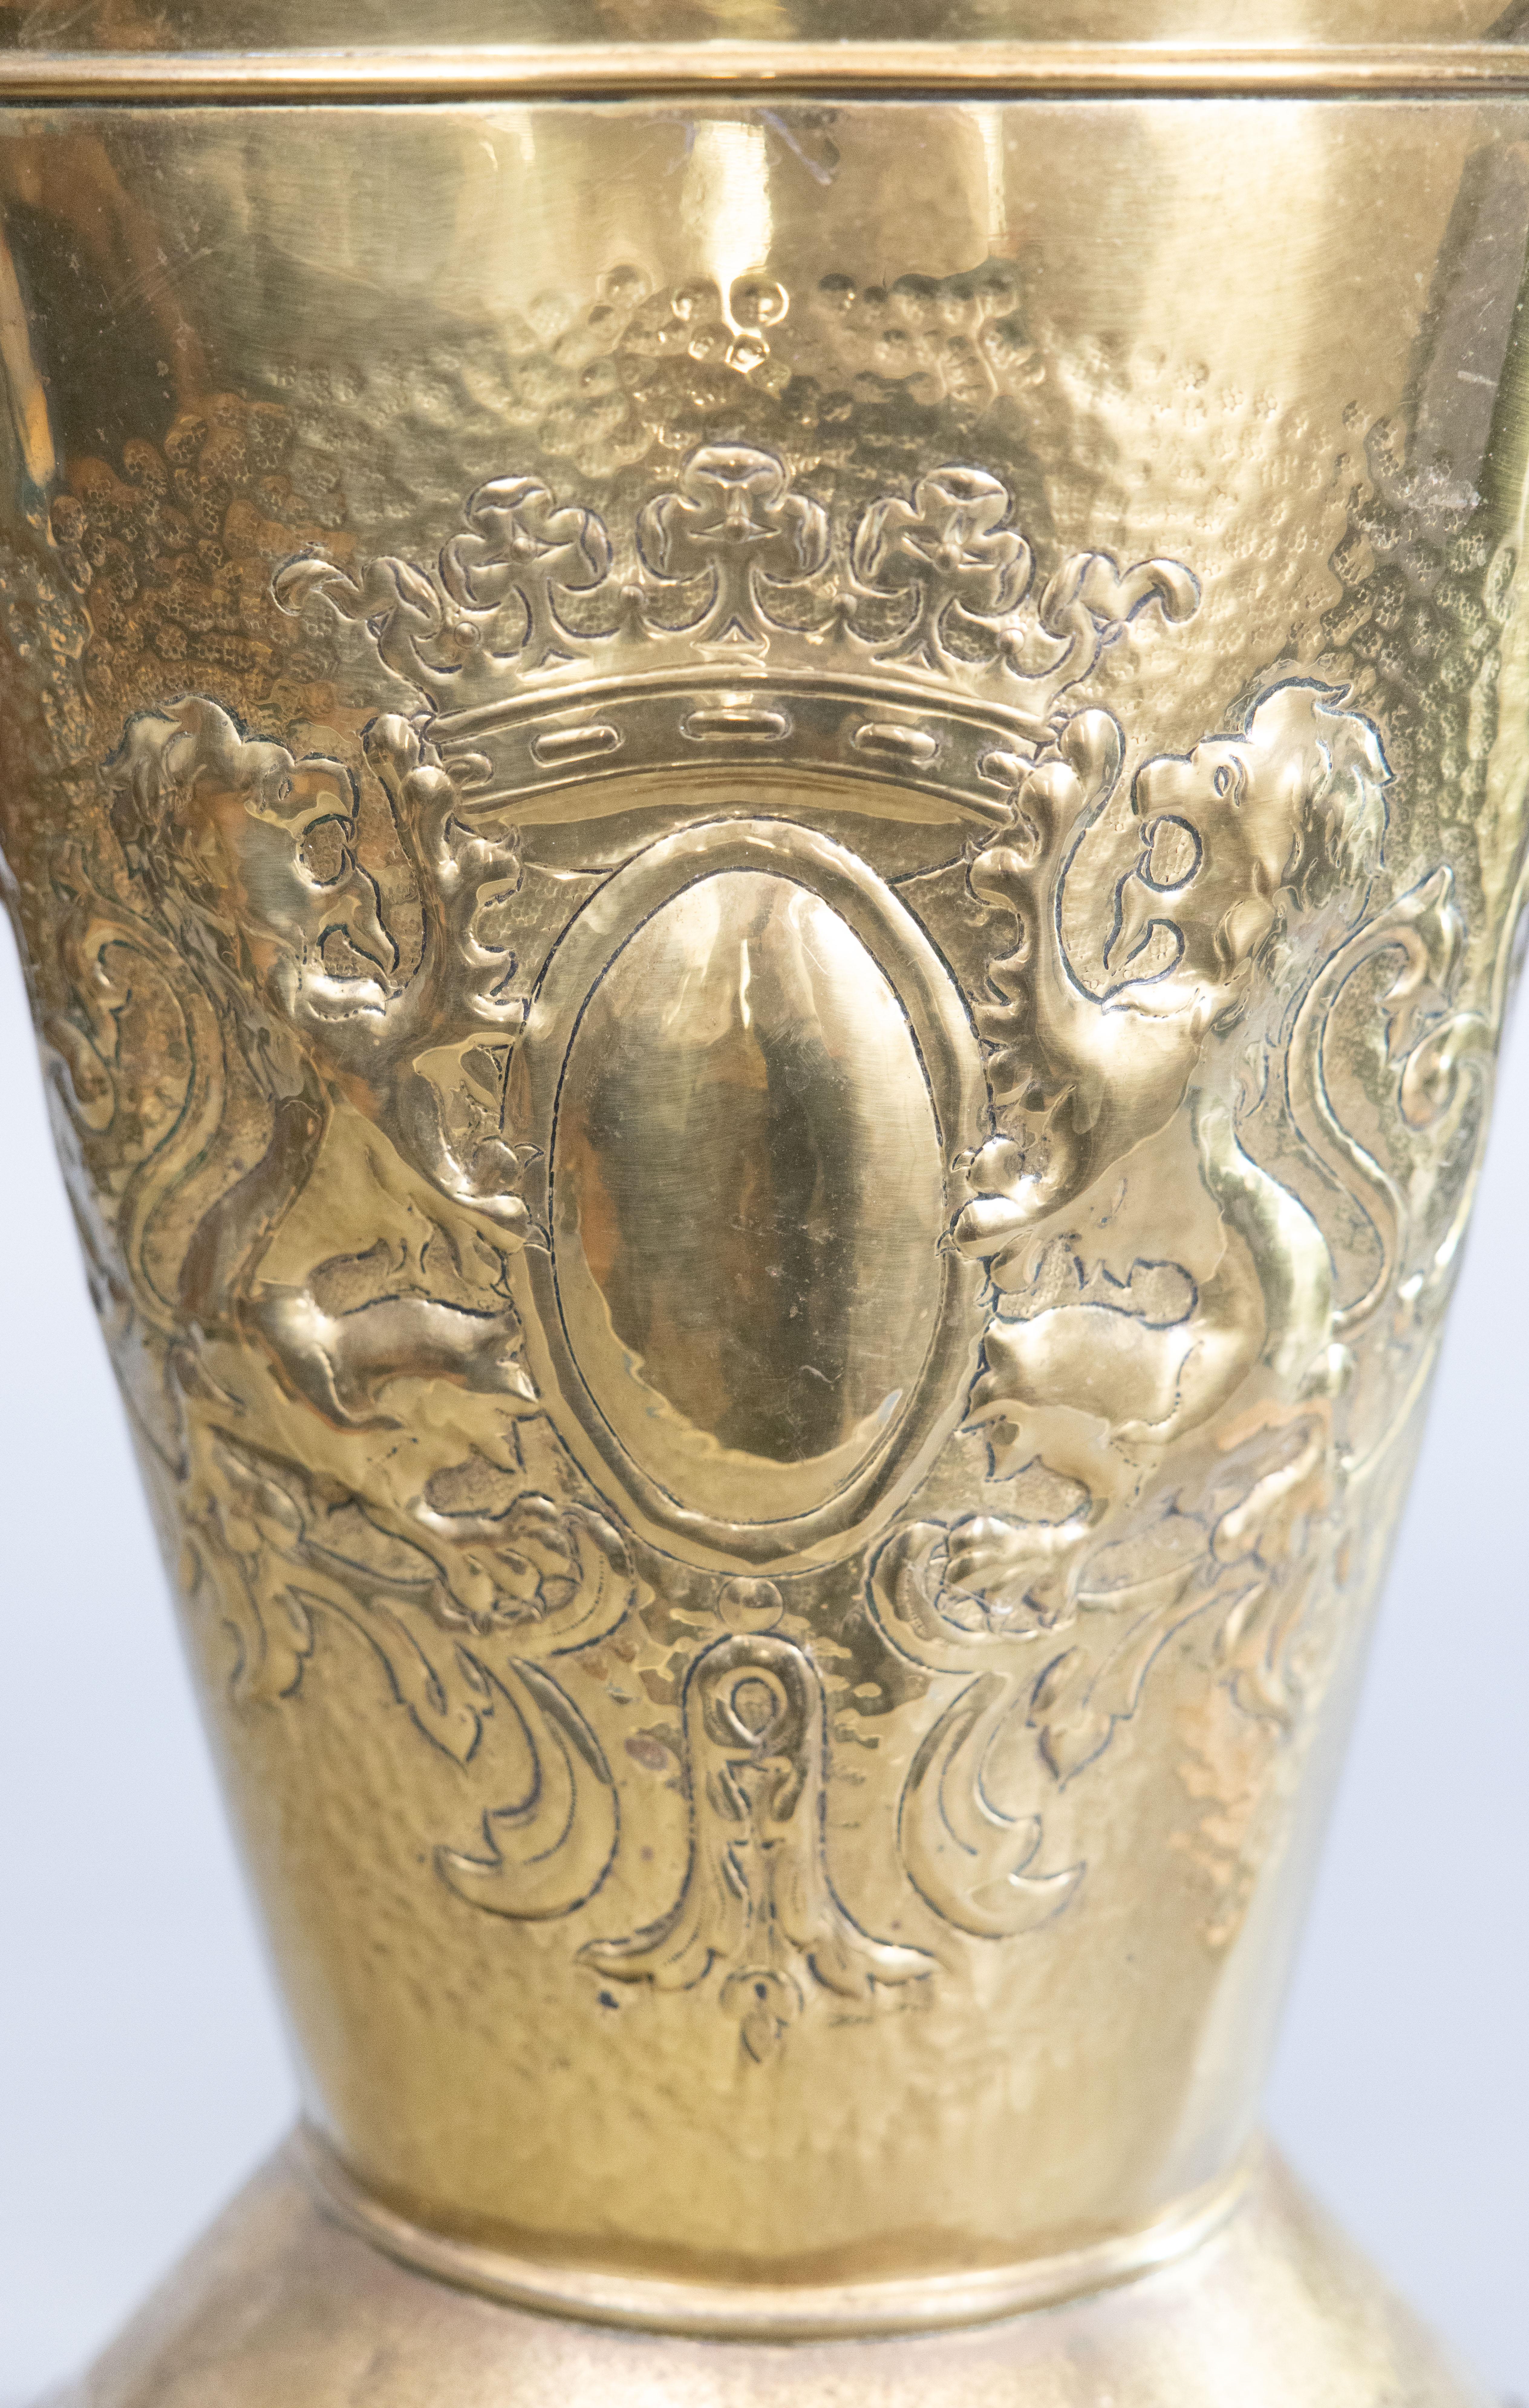 19th Century French Heraldic Hammered Brass Repoussé Grape Hod Umbrella Stand For Sale 5